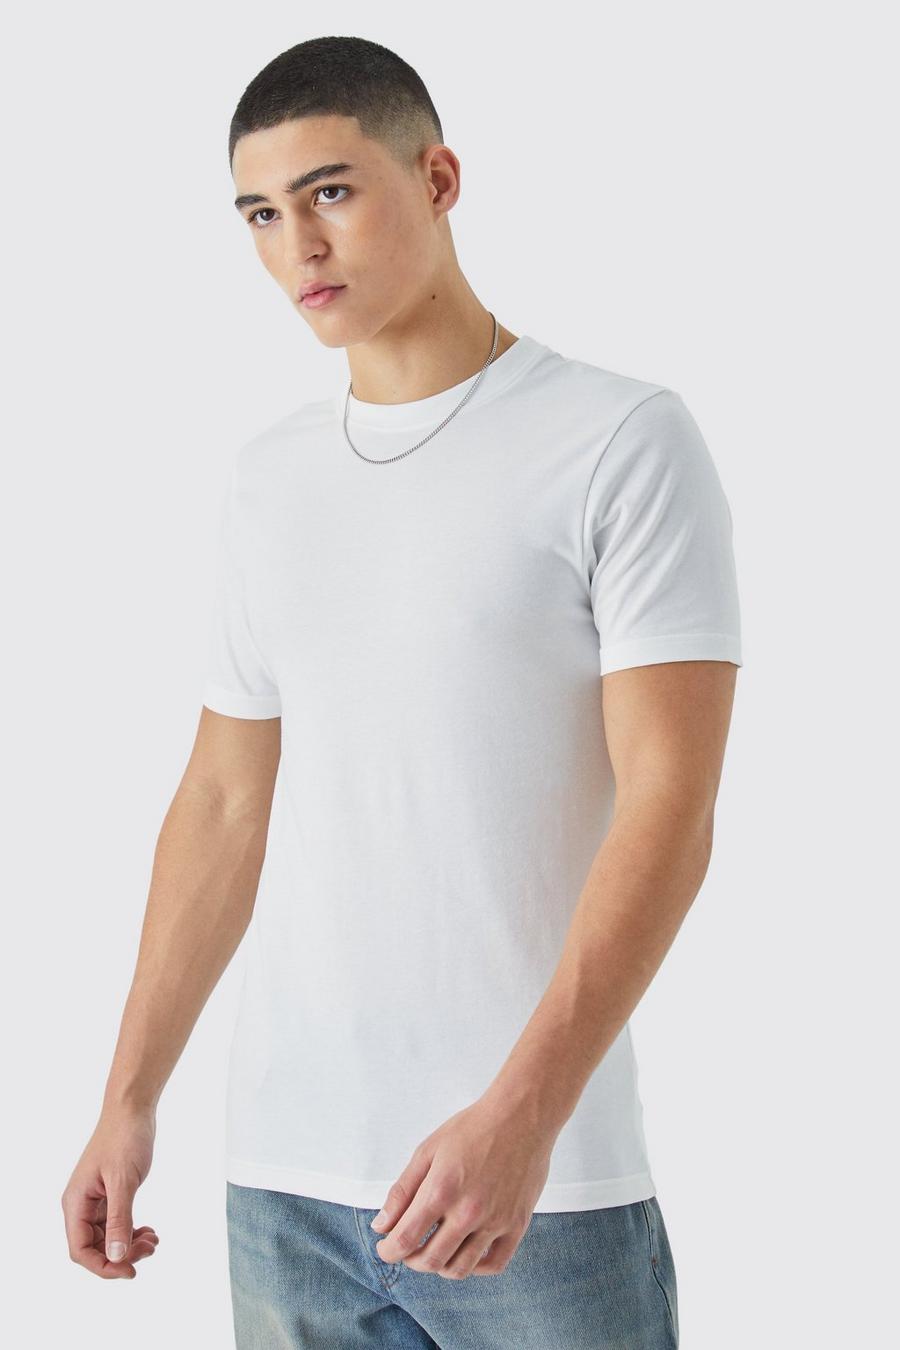 White Basic Muscle Fit T-shirt